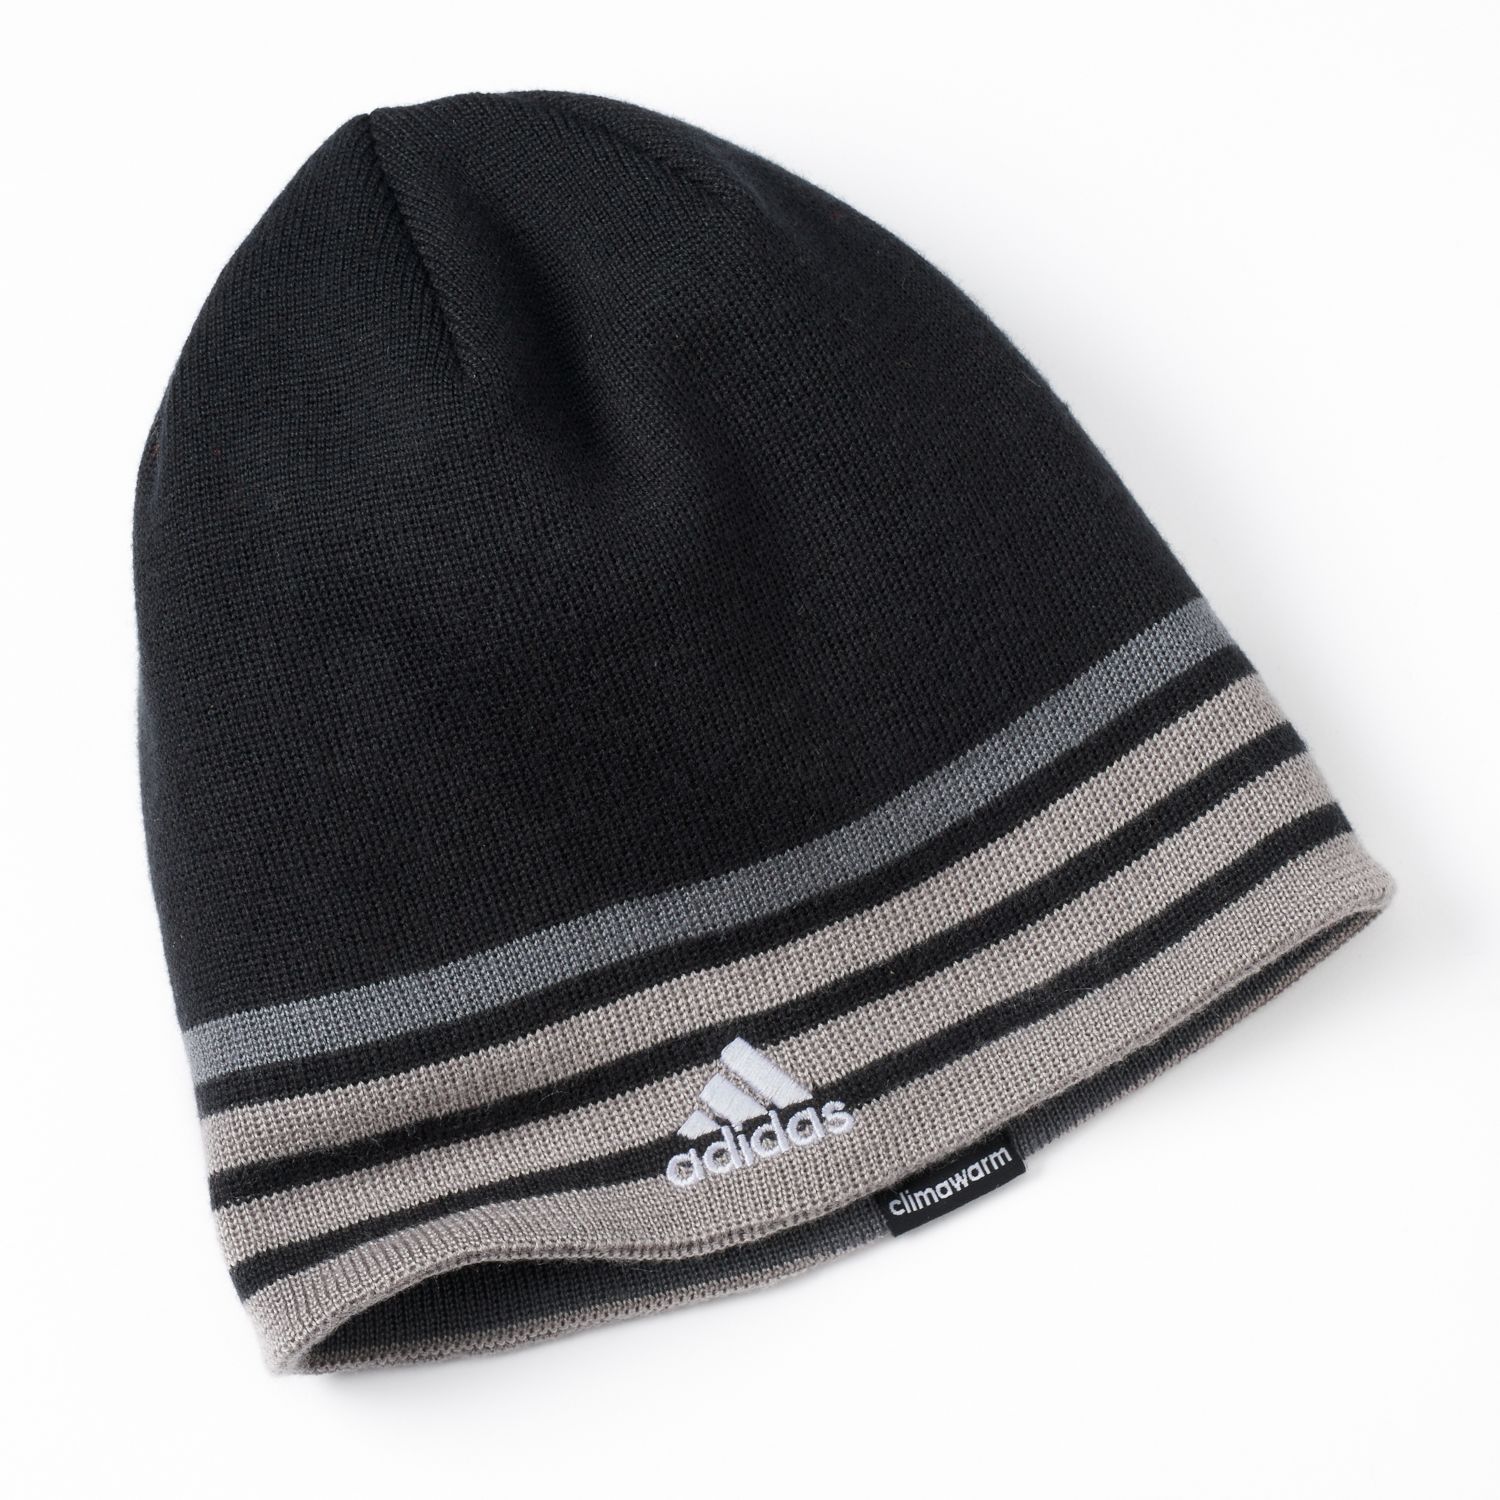 climawarm hat